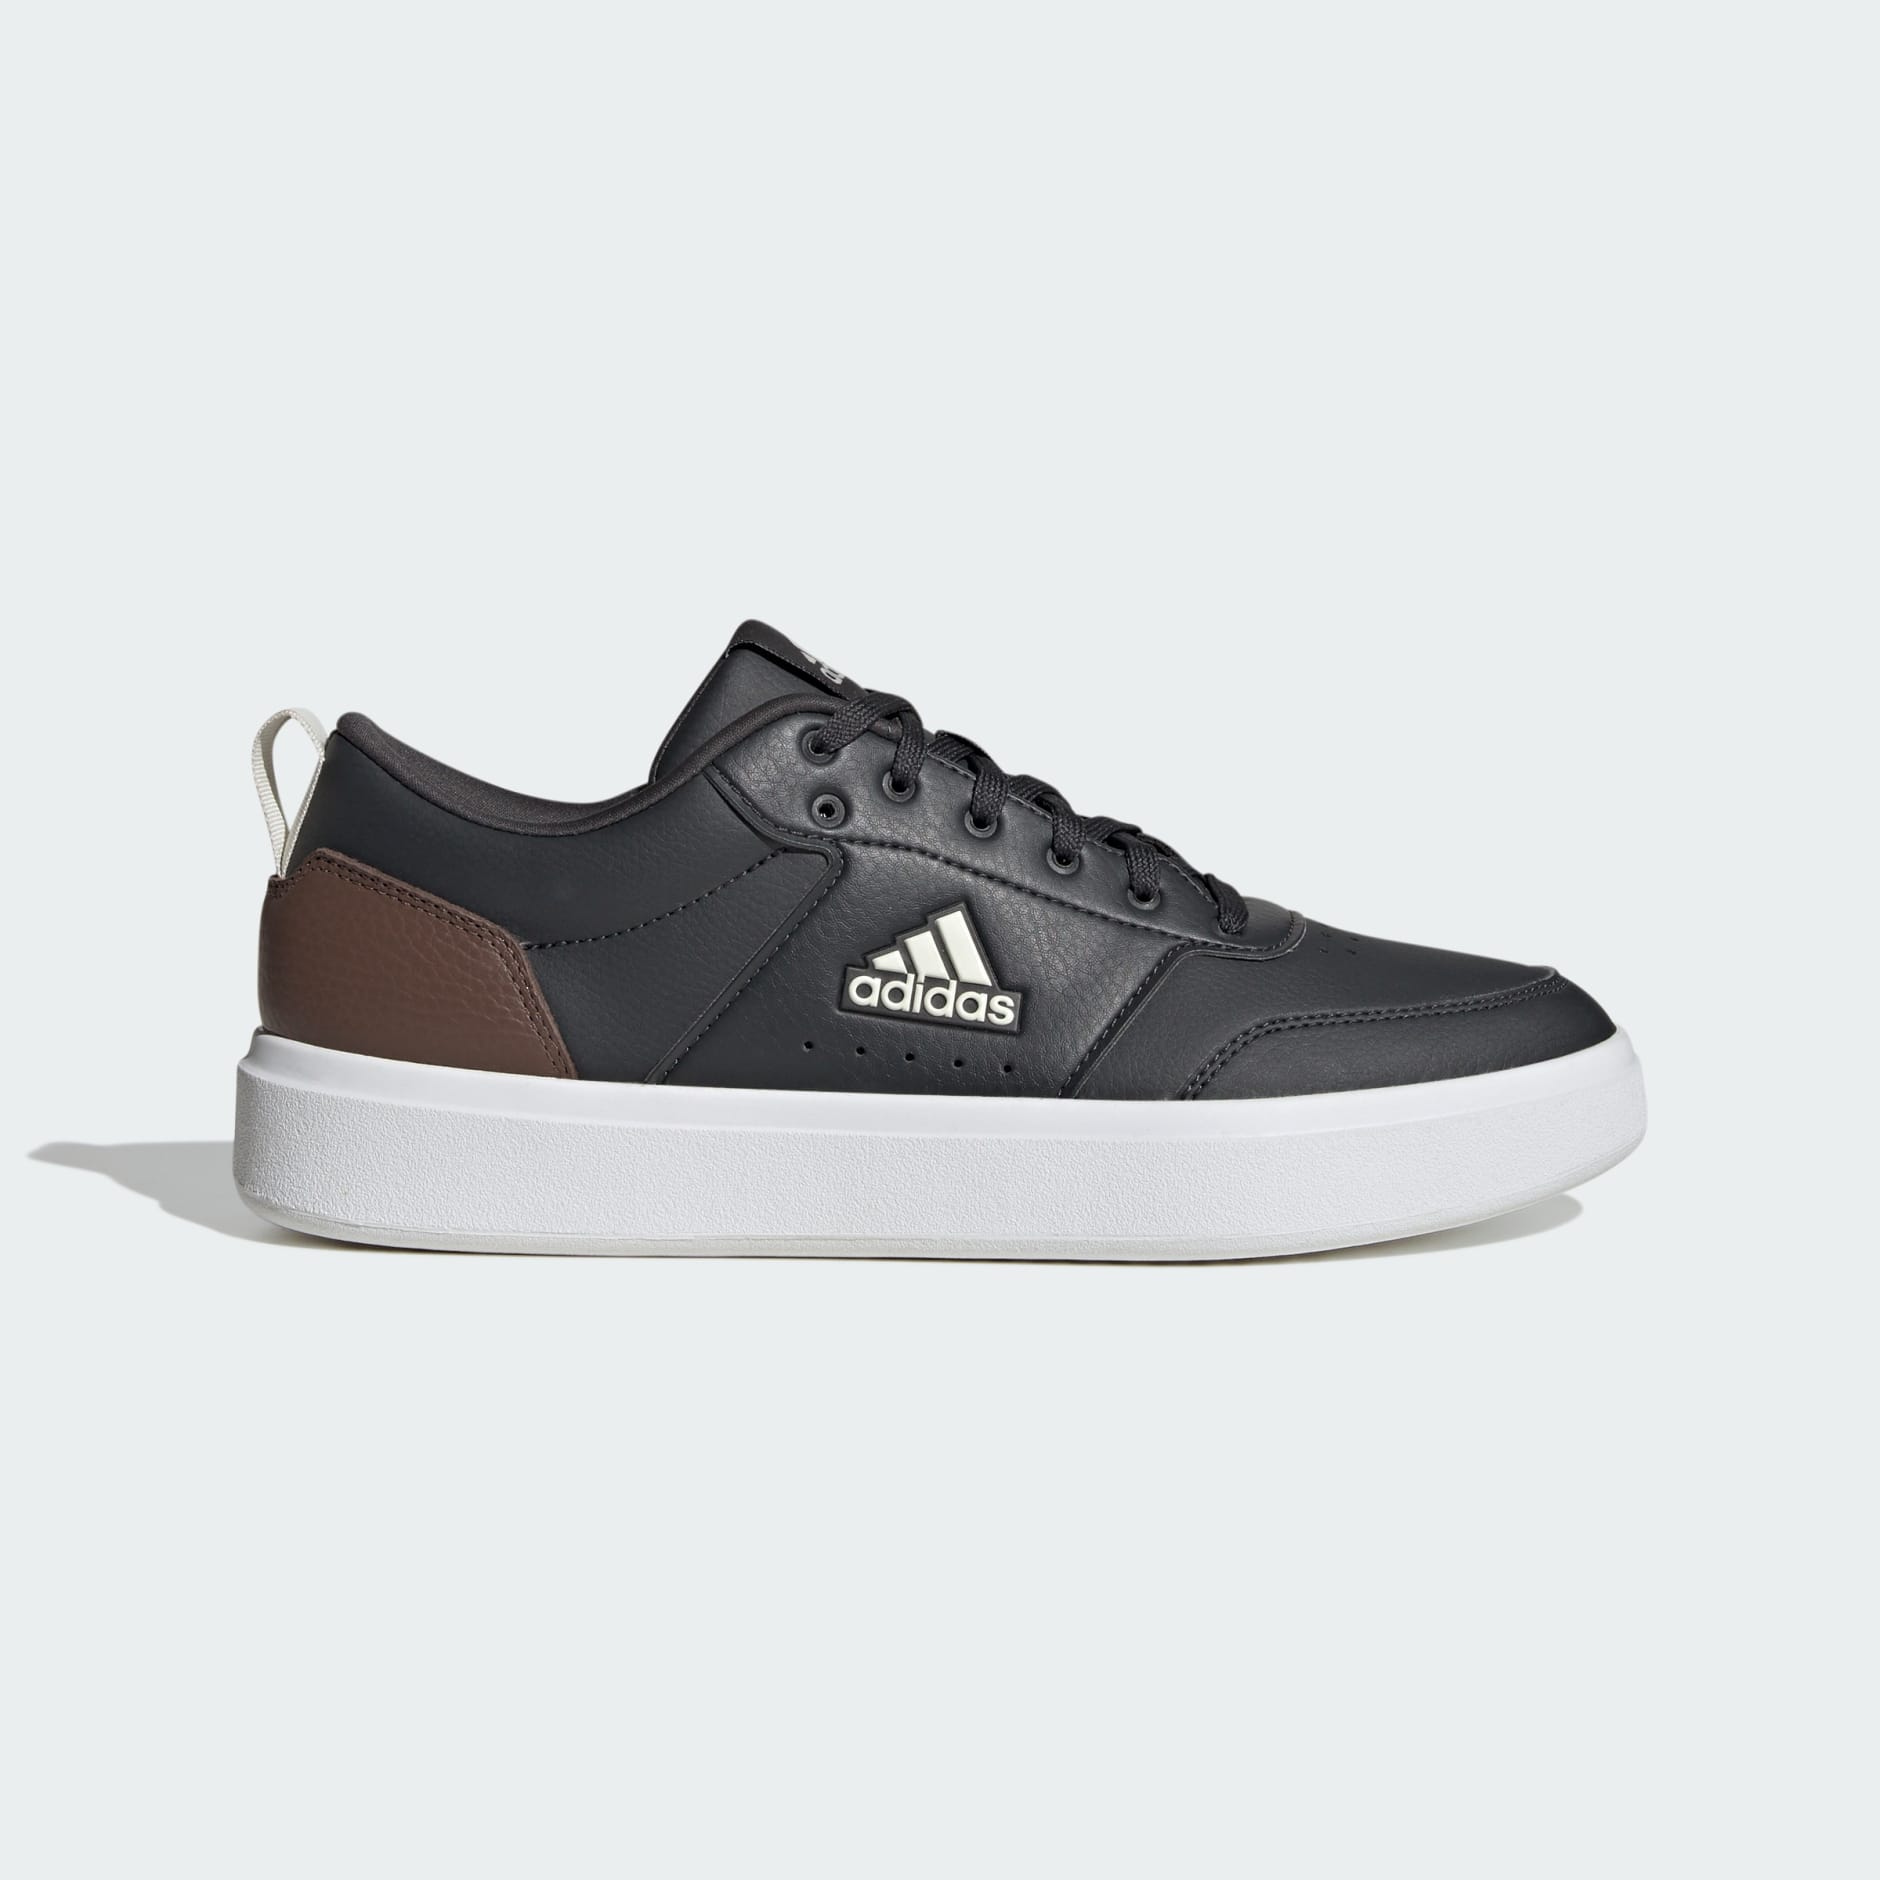 Shoes - Park St. Shoes - Grey | adidas South Africa